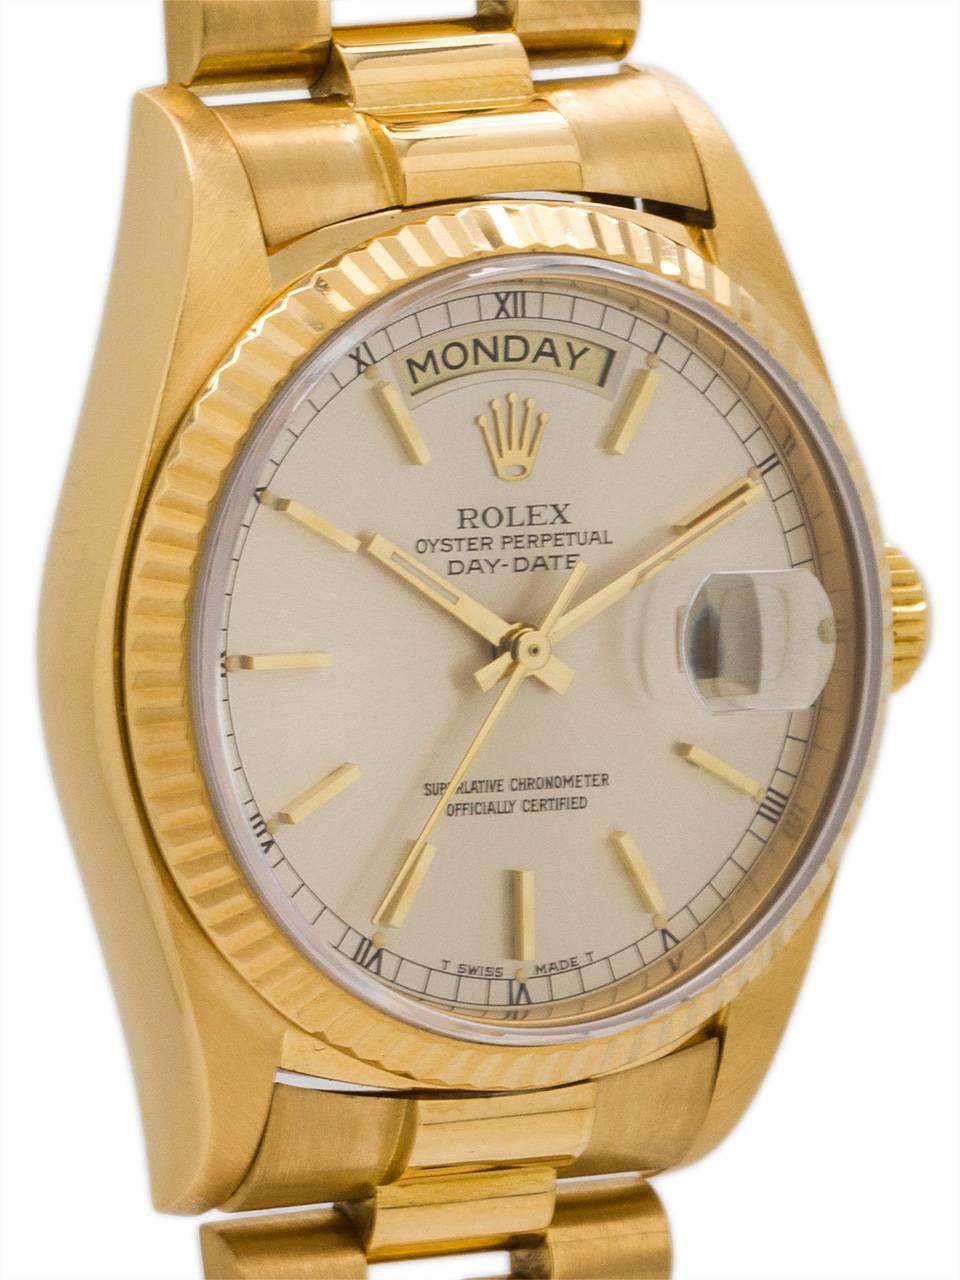 Rolex yellow gold Day Date wristwatch Ref 18038, circa 1986 In Excellent Condition For Sale In West Hollywood, CA